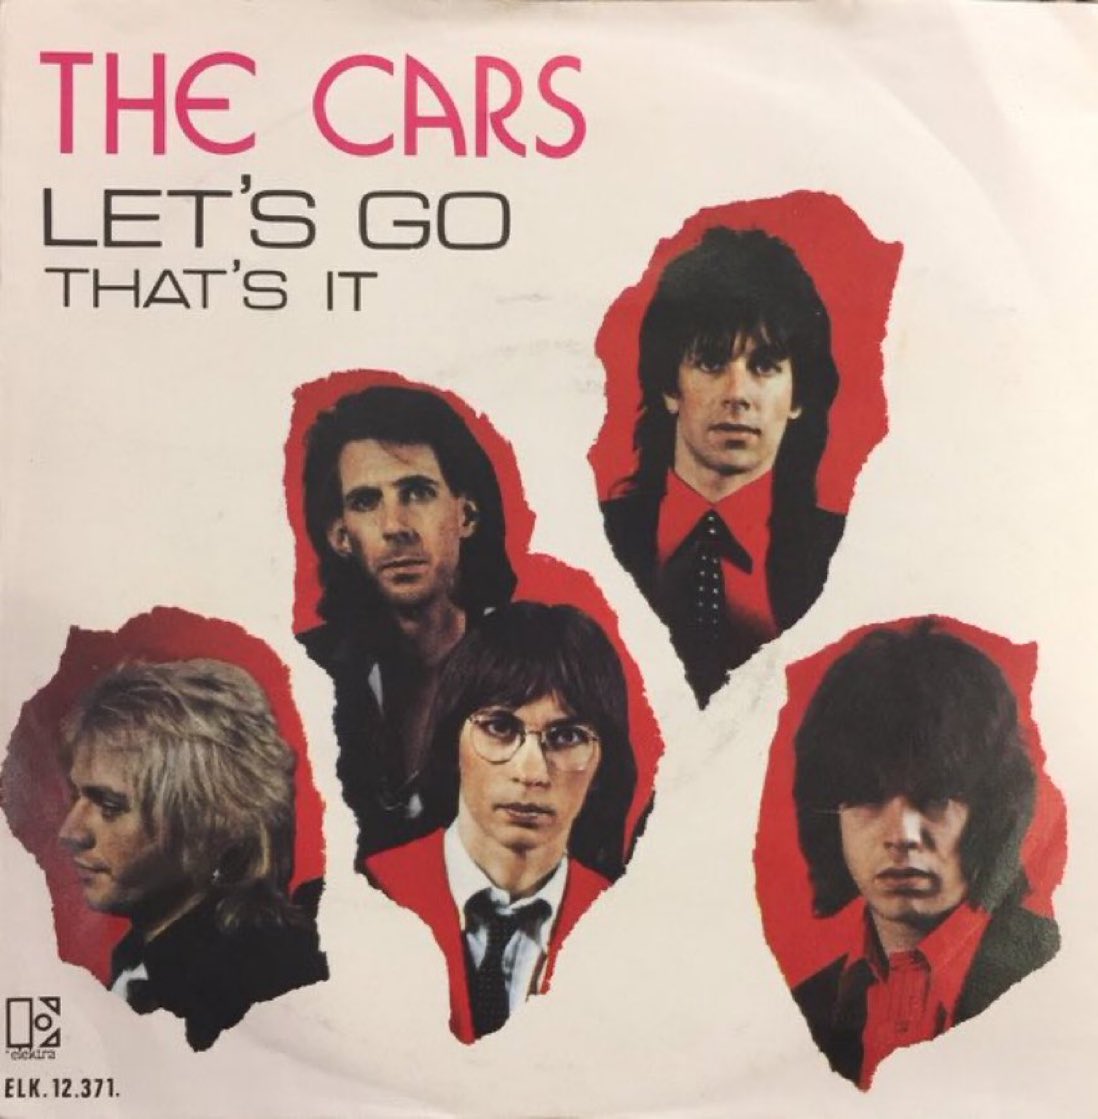 On June 12, 1979, The Cars released “Let’s Go” as the lead single off their “Candy-O” album. It would reach number 14 on the Billboard Hot 100. #TheCars